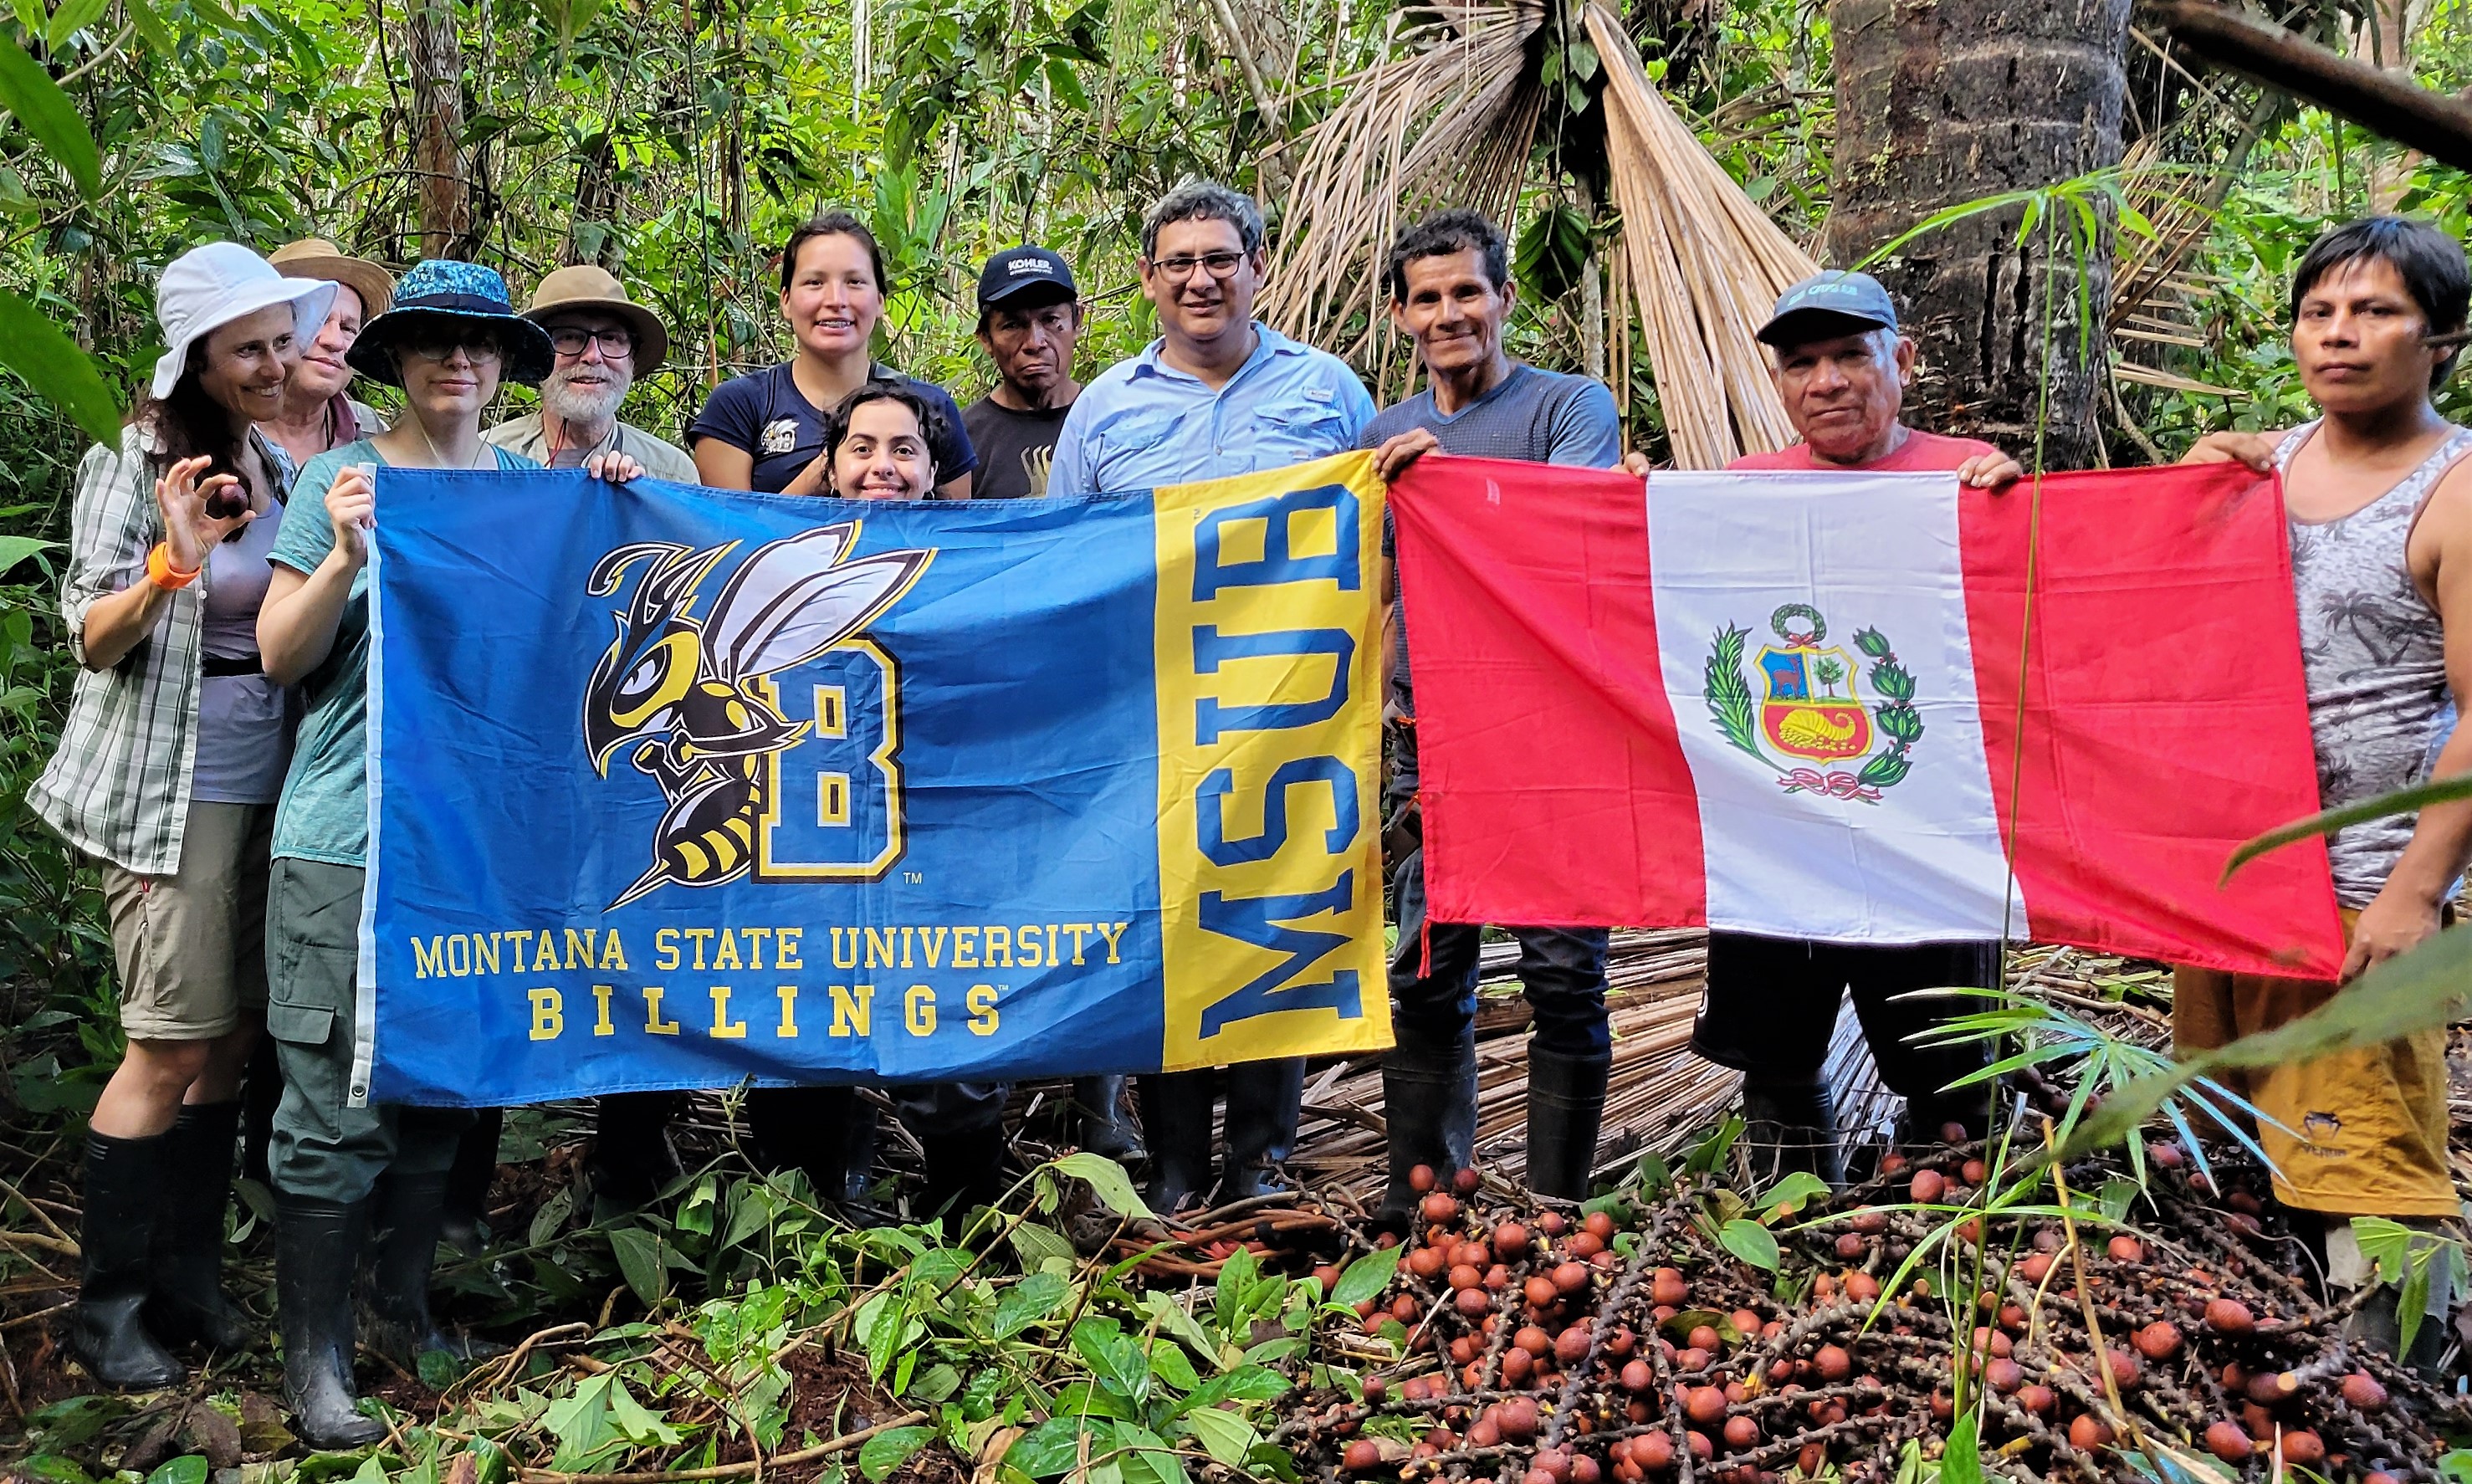 Group of people in the jungle holding flags